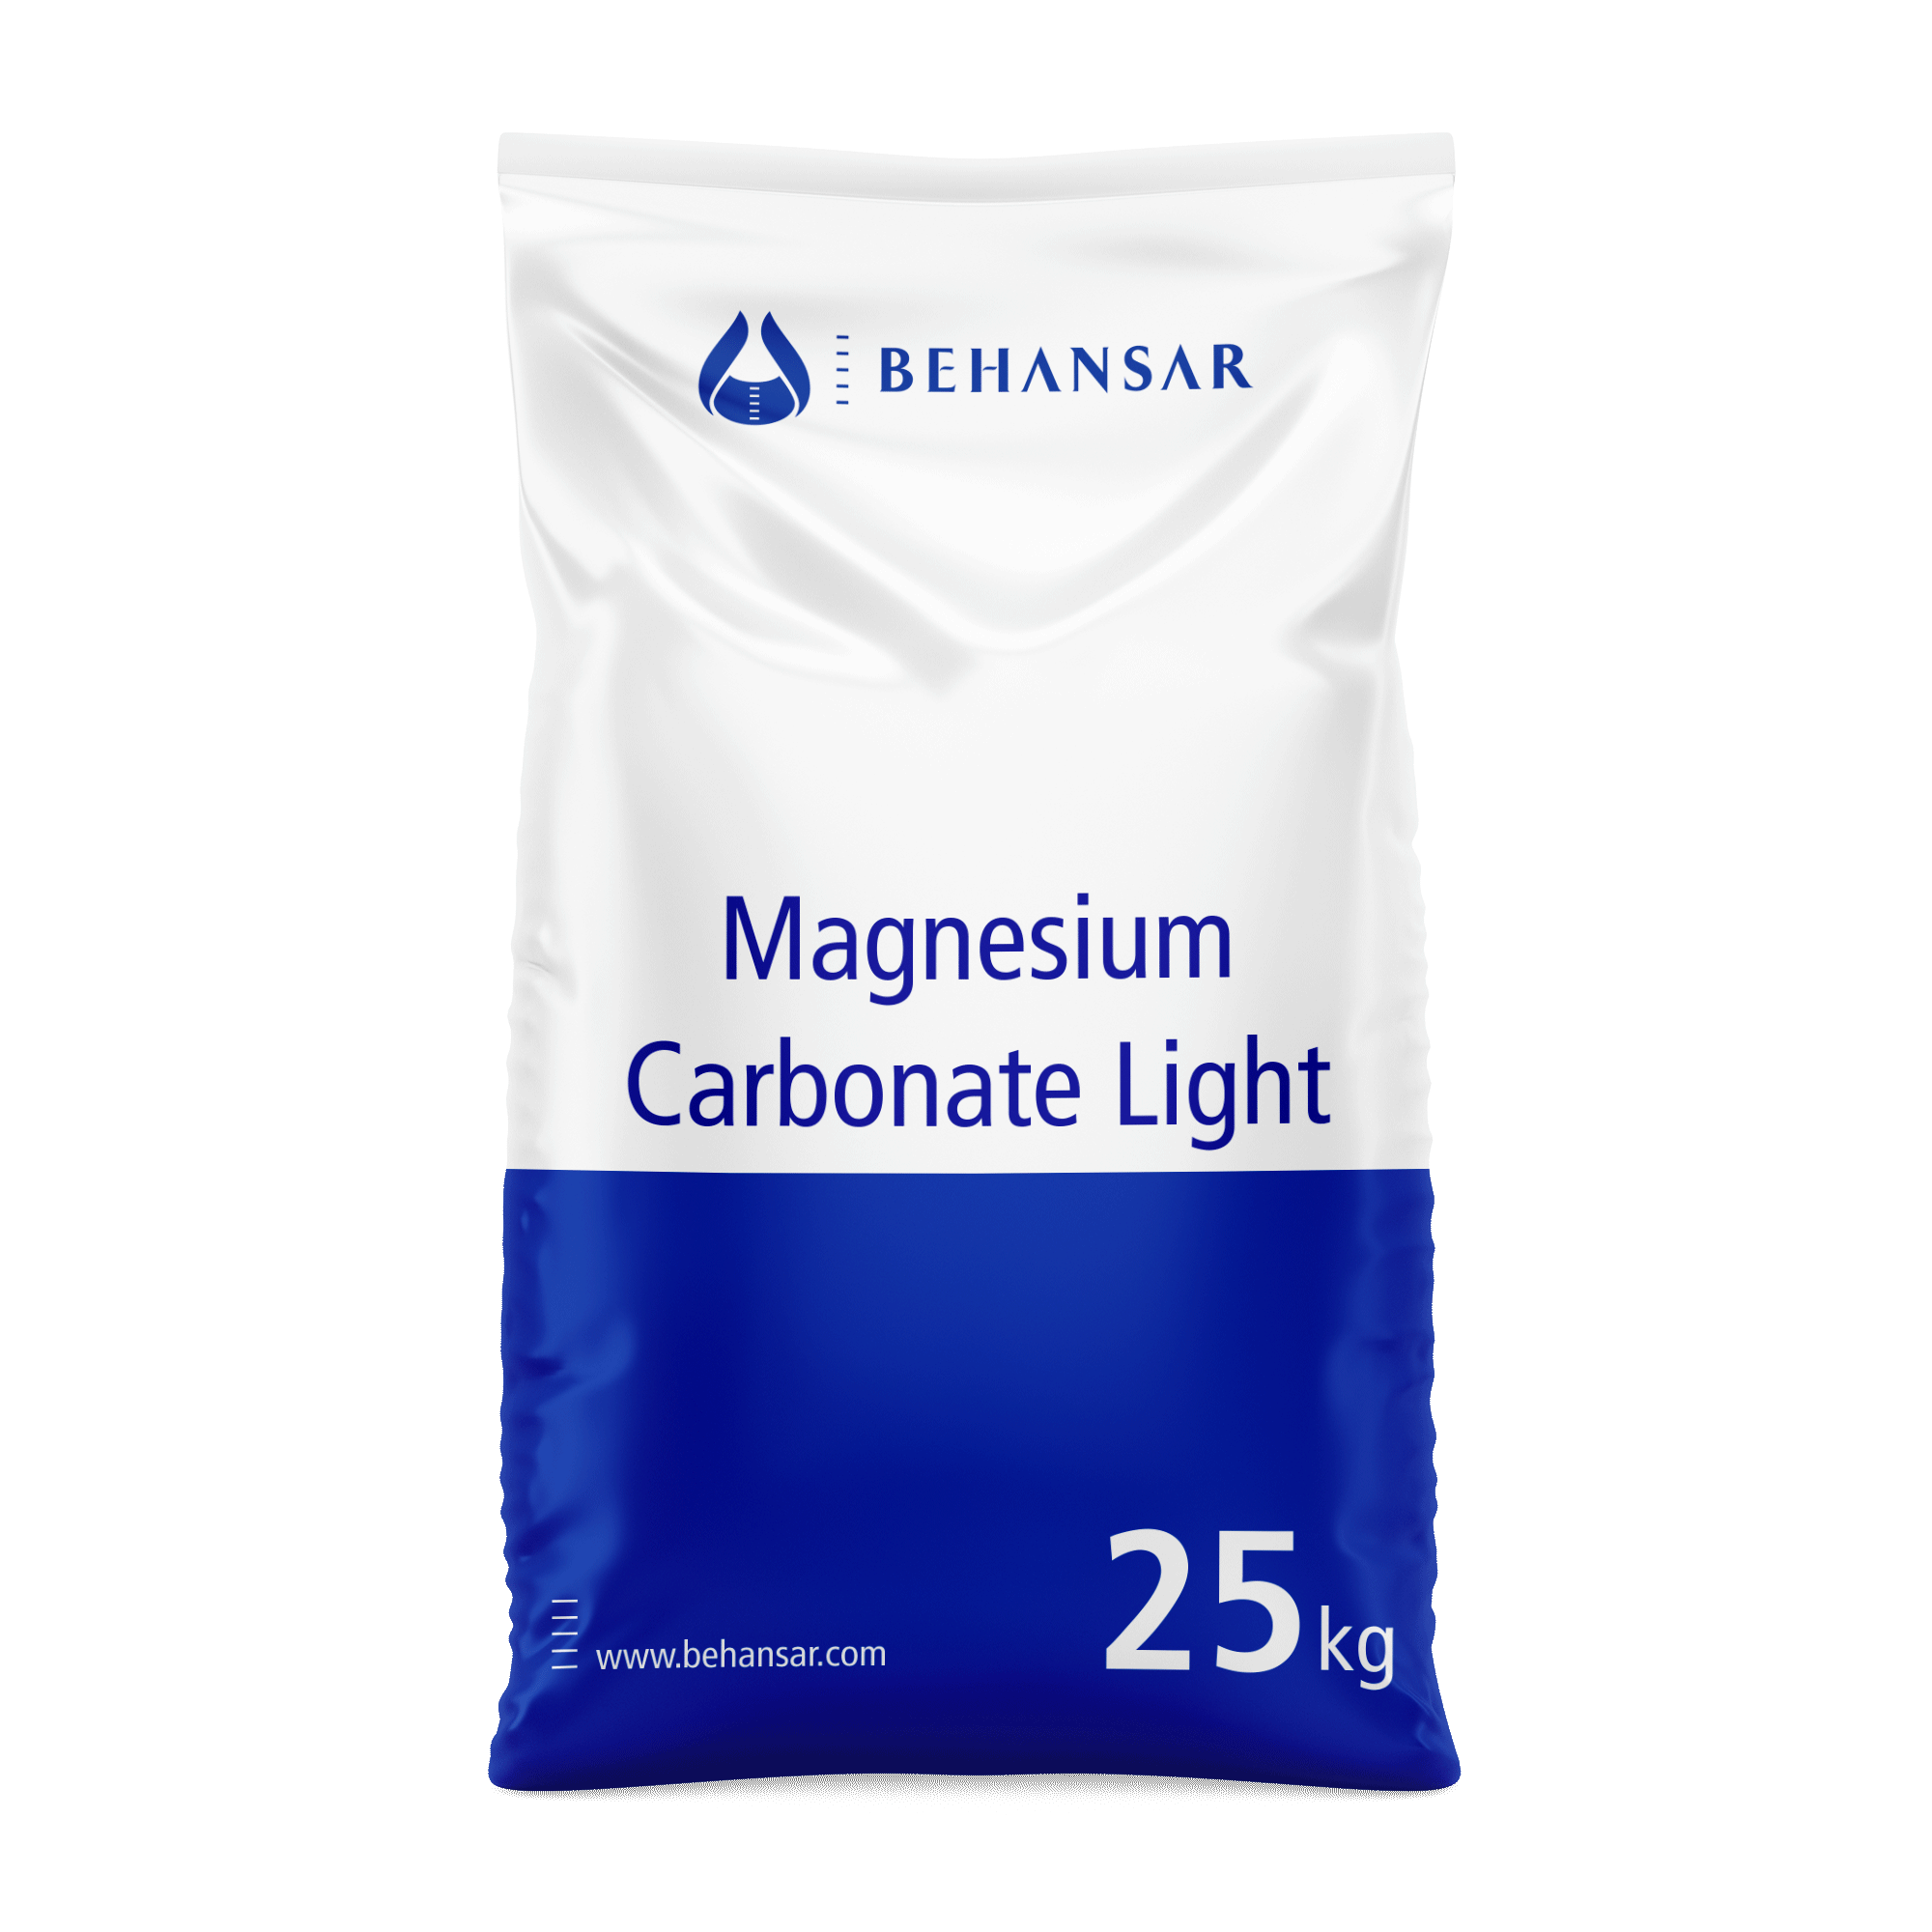 Magnesium Carbonate Light is one of the products of Behansar Co